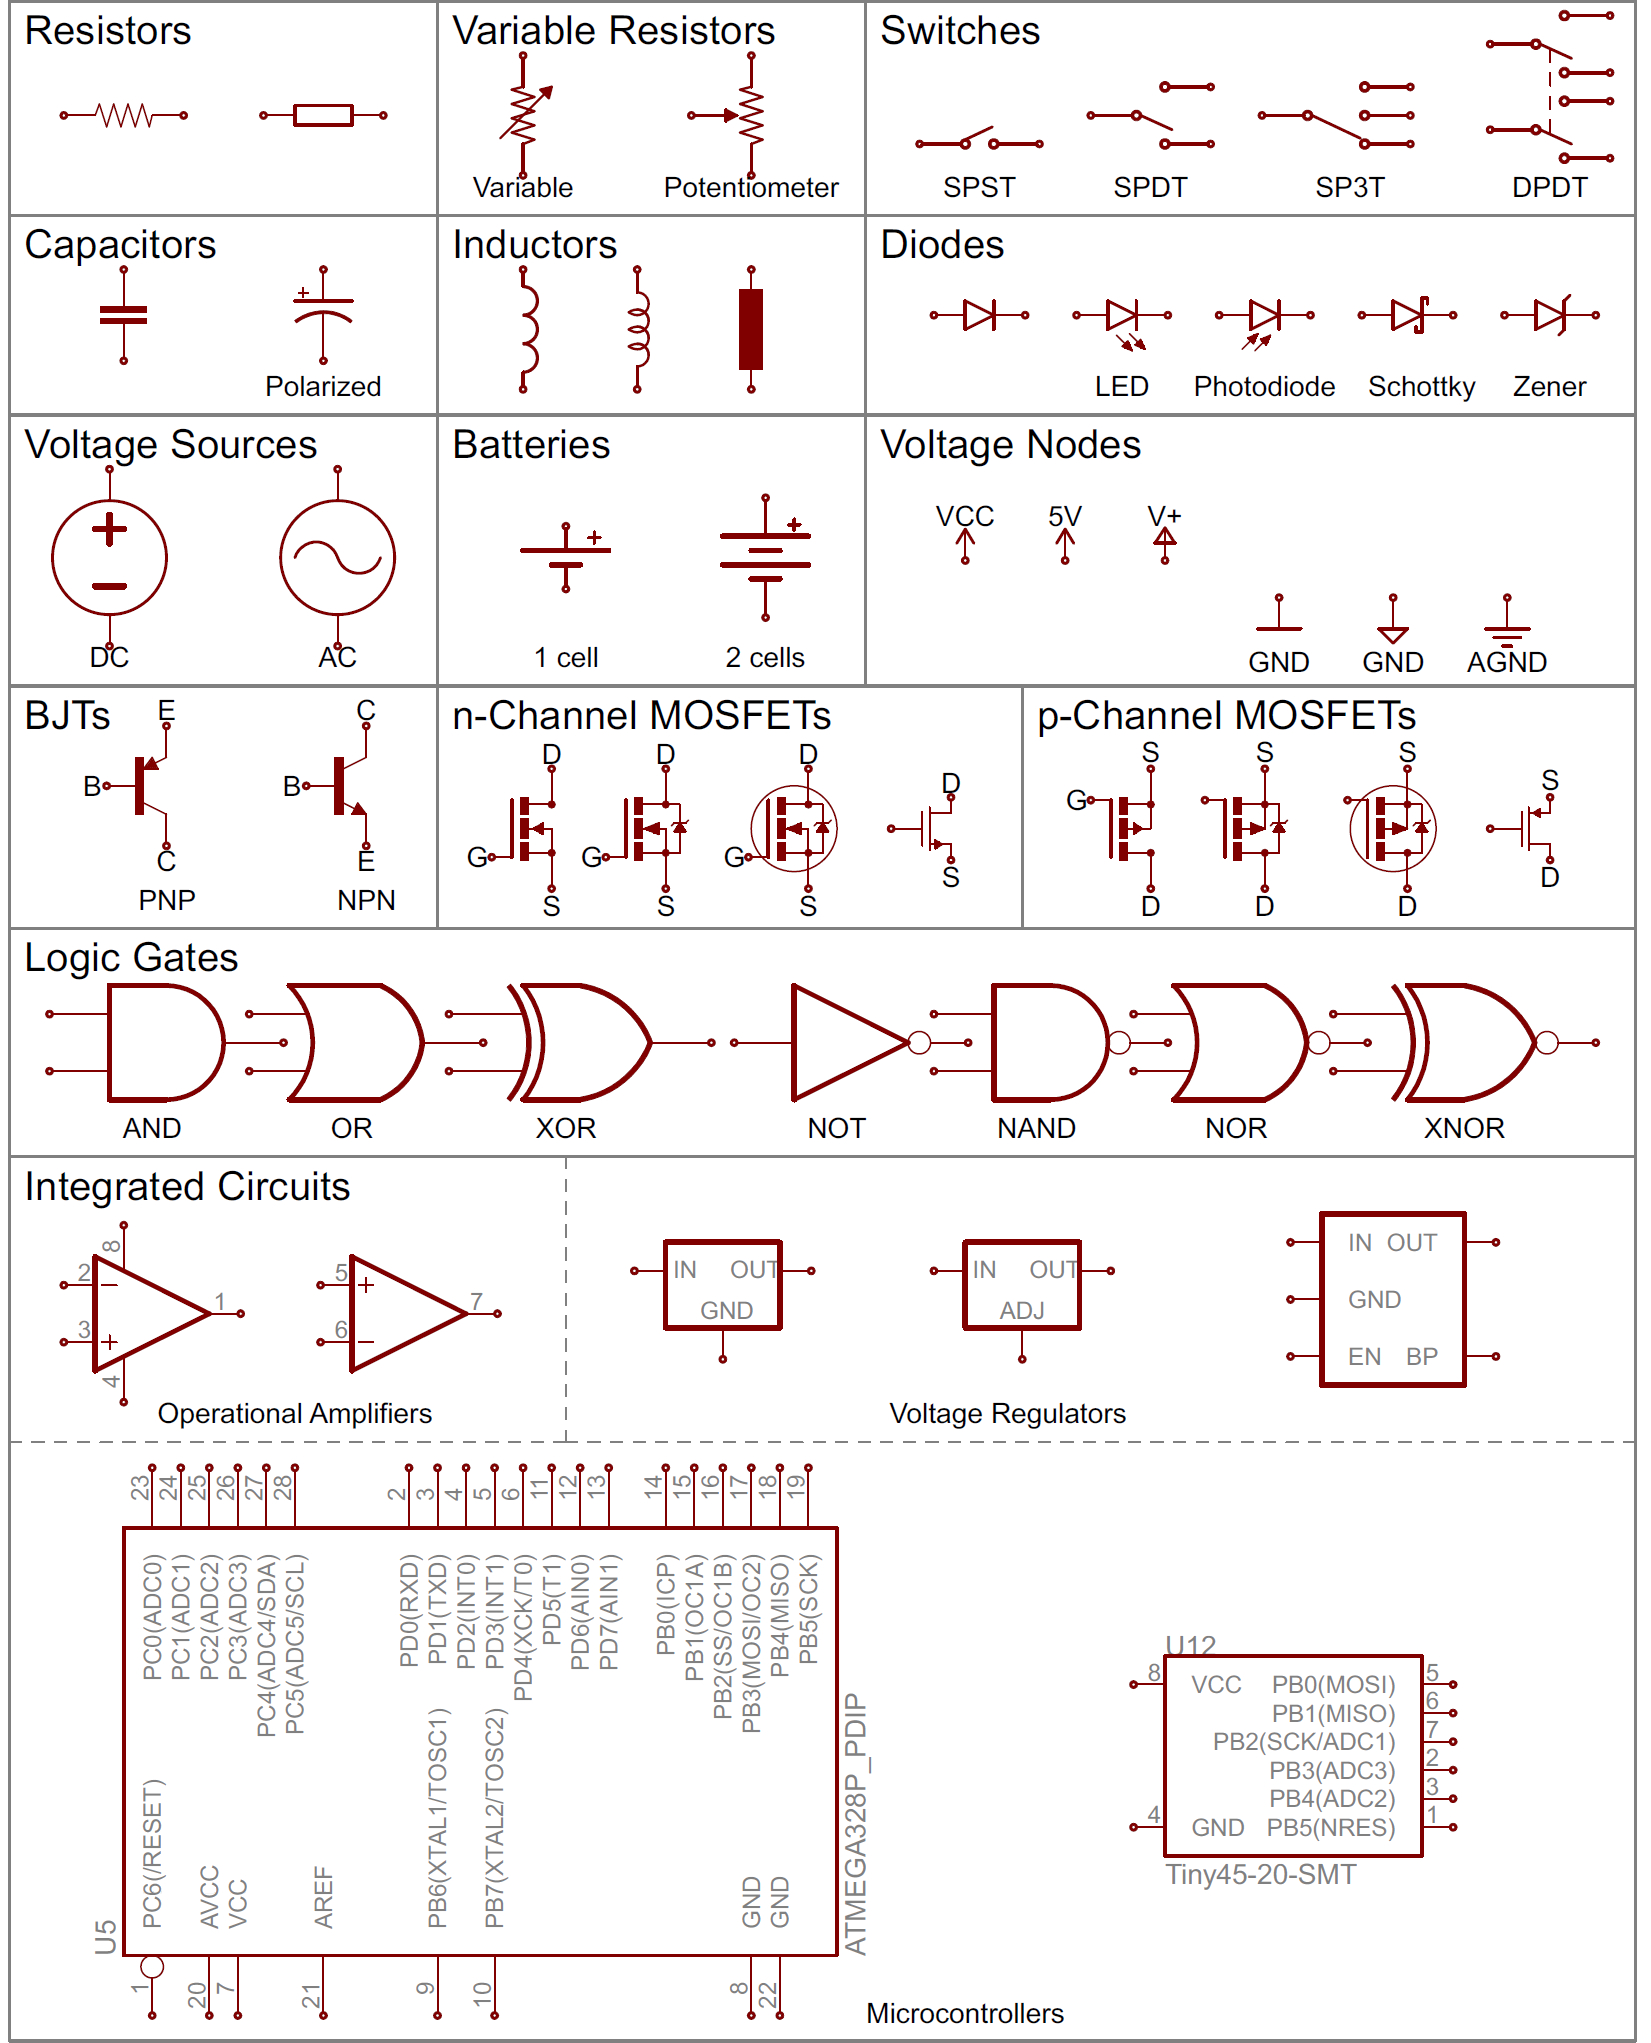 How To Read A Schematic - Learn.sparkfun - How To Read A Wiring Diagram